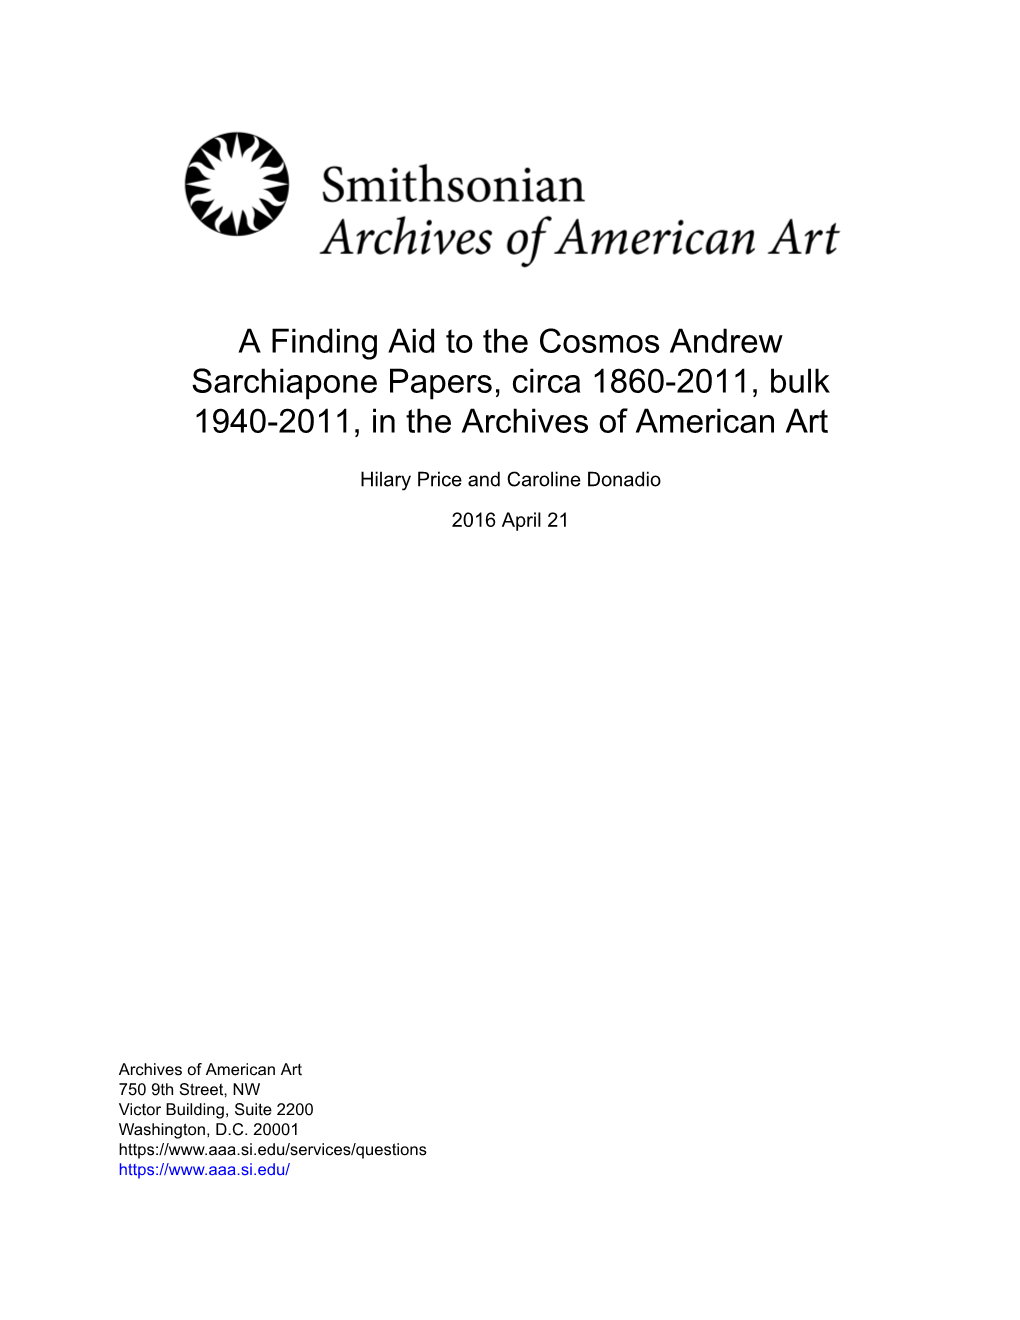 A Finding Aid to the Cosmos Andrew Sarchiapone Papers, Circa 1860-2011, Bulk 1940-2011, in the Archives of American Art